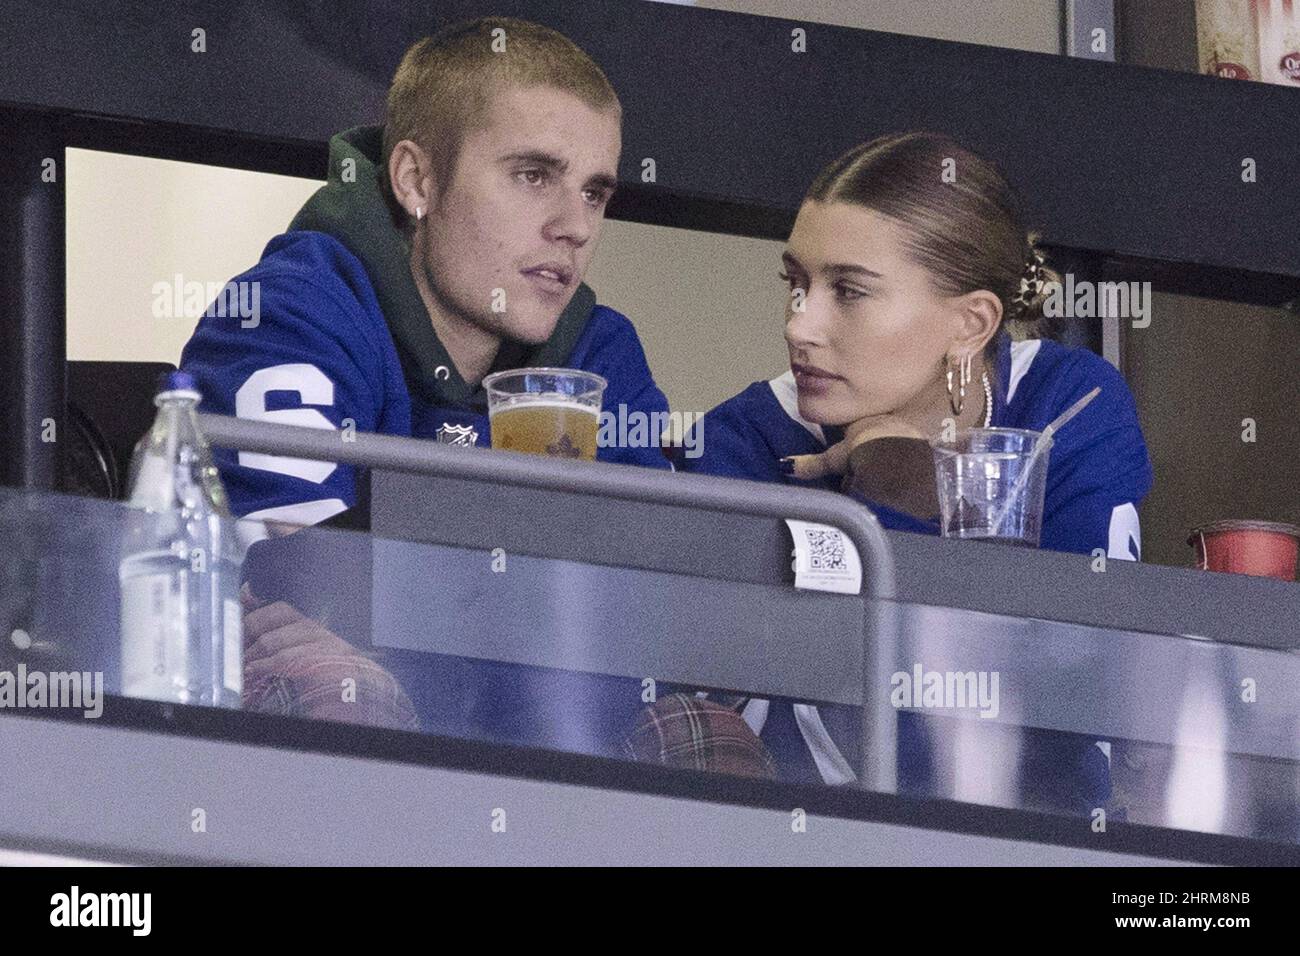 Justin Bieber: WATCH: Justin Bieber enthusiastically cheers on the Toronto  Maple Leafs